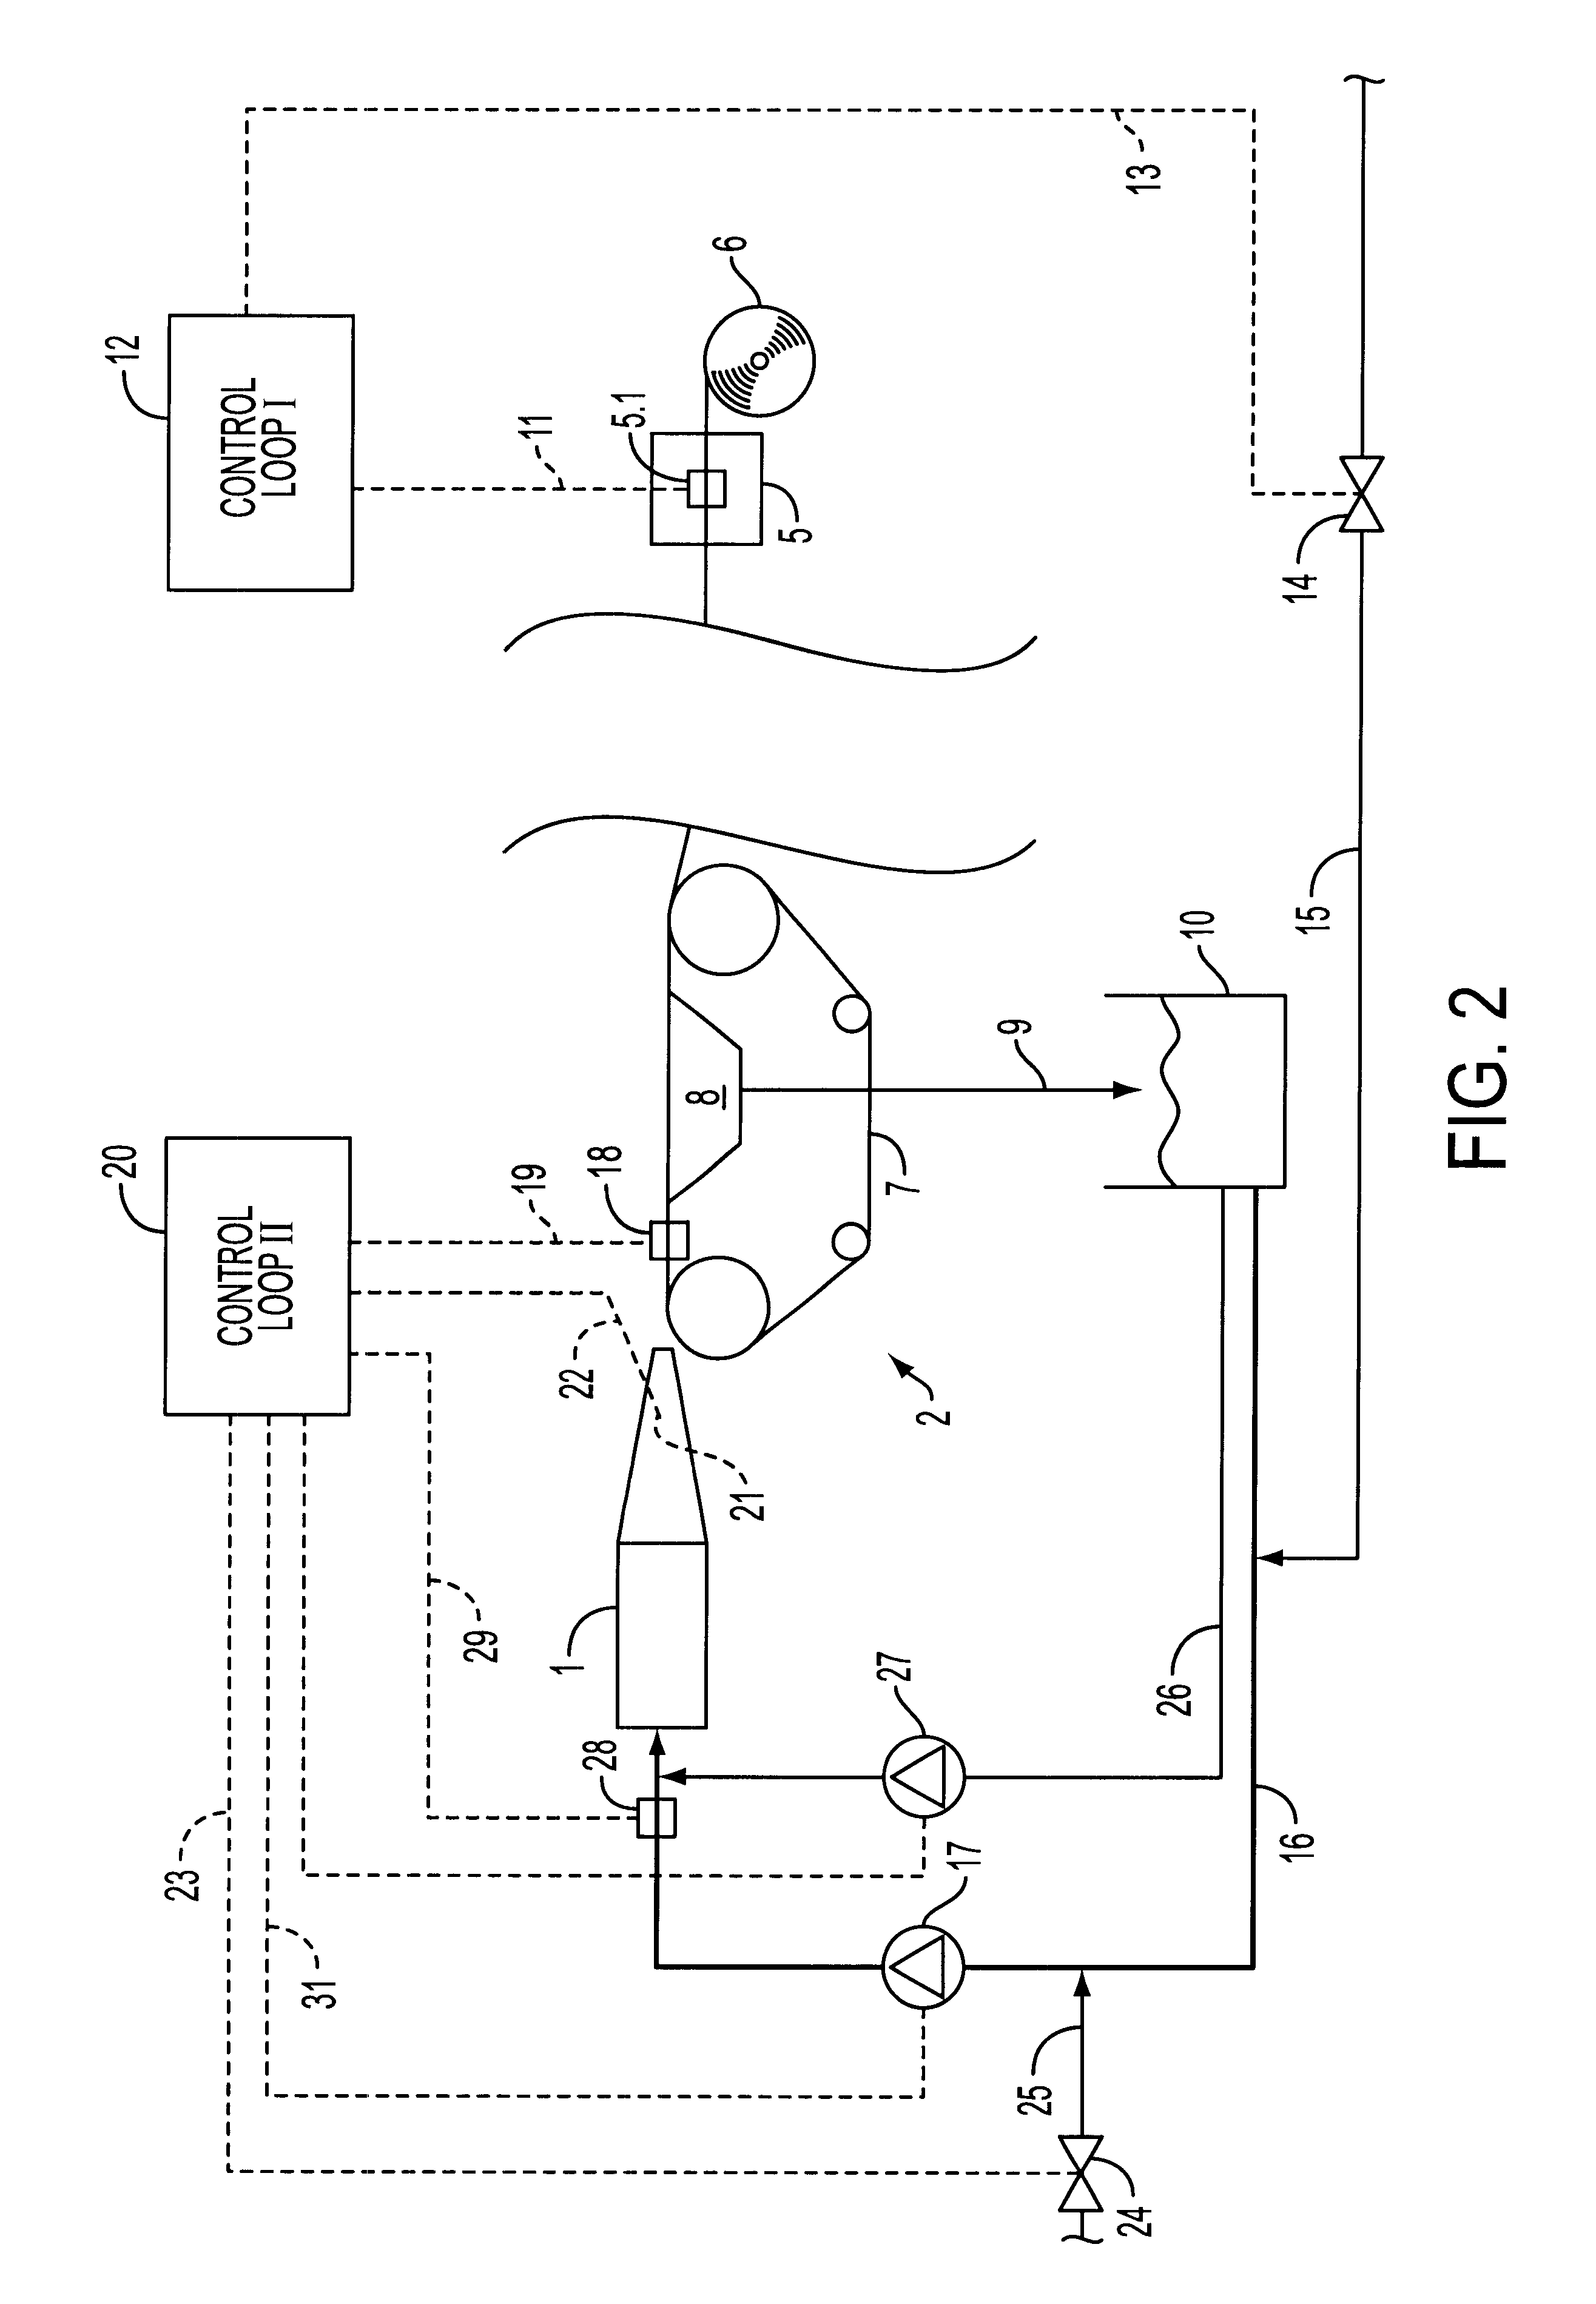 Device to control or regulate the basis weight of a paper or cardboard web